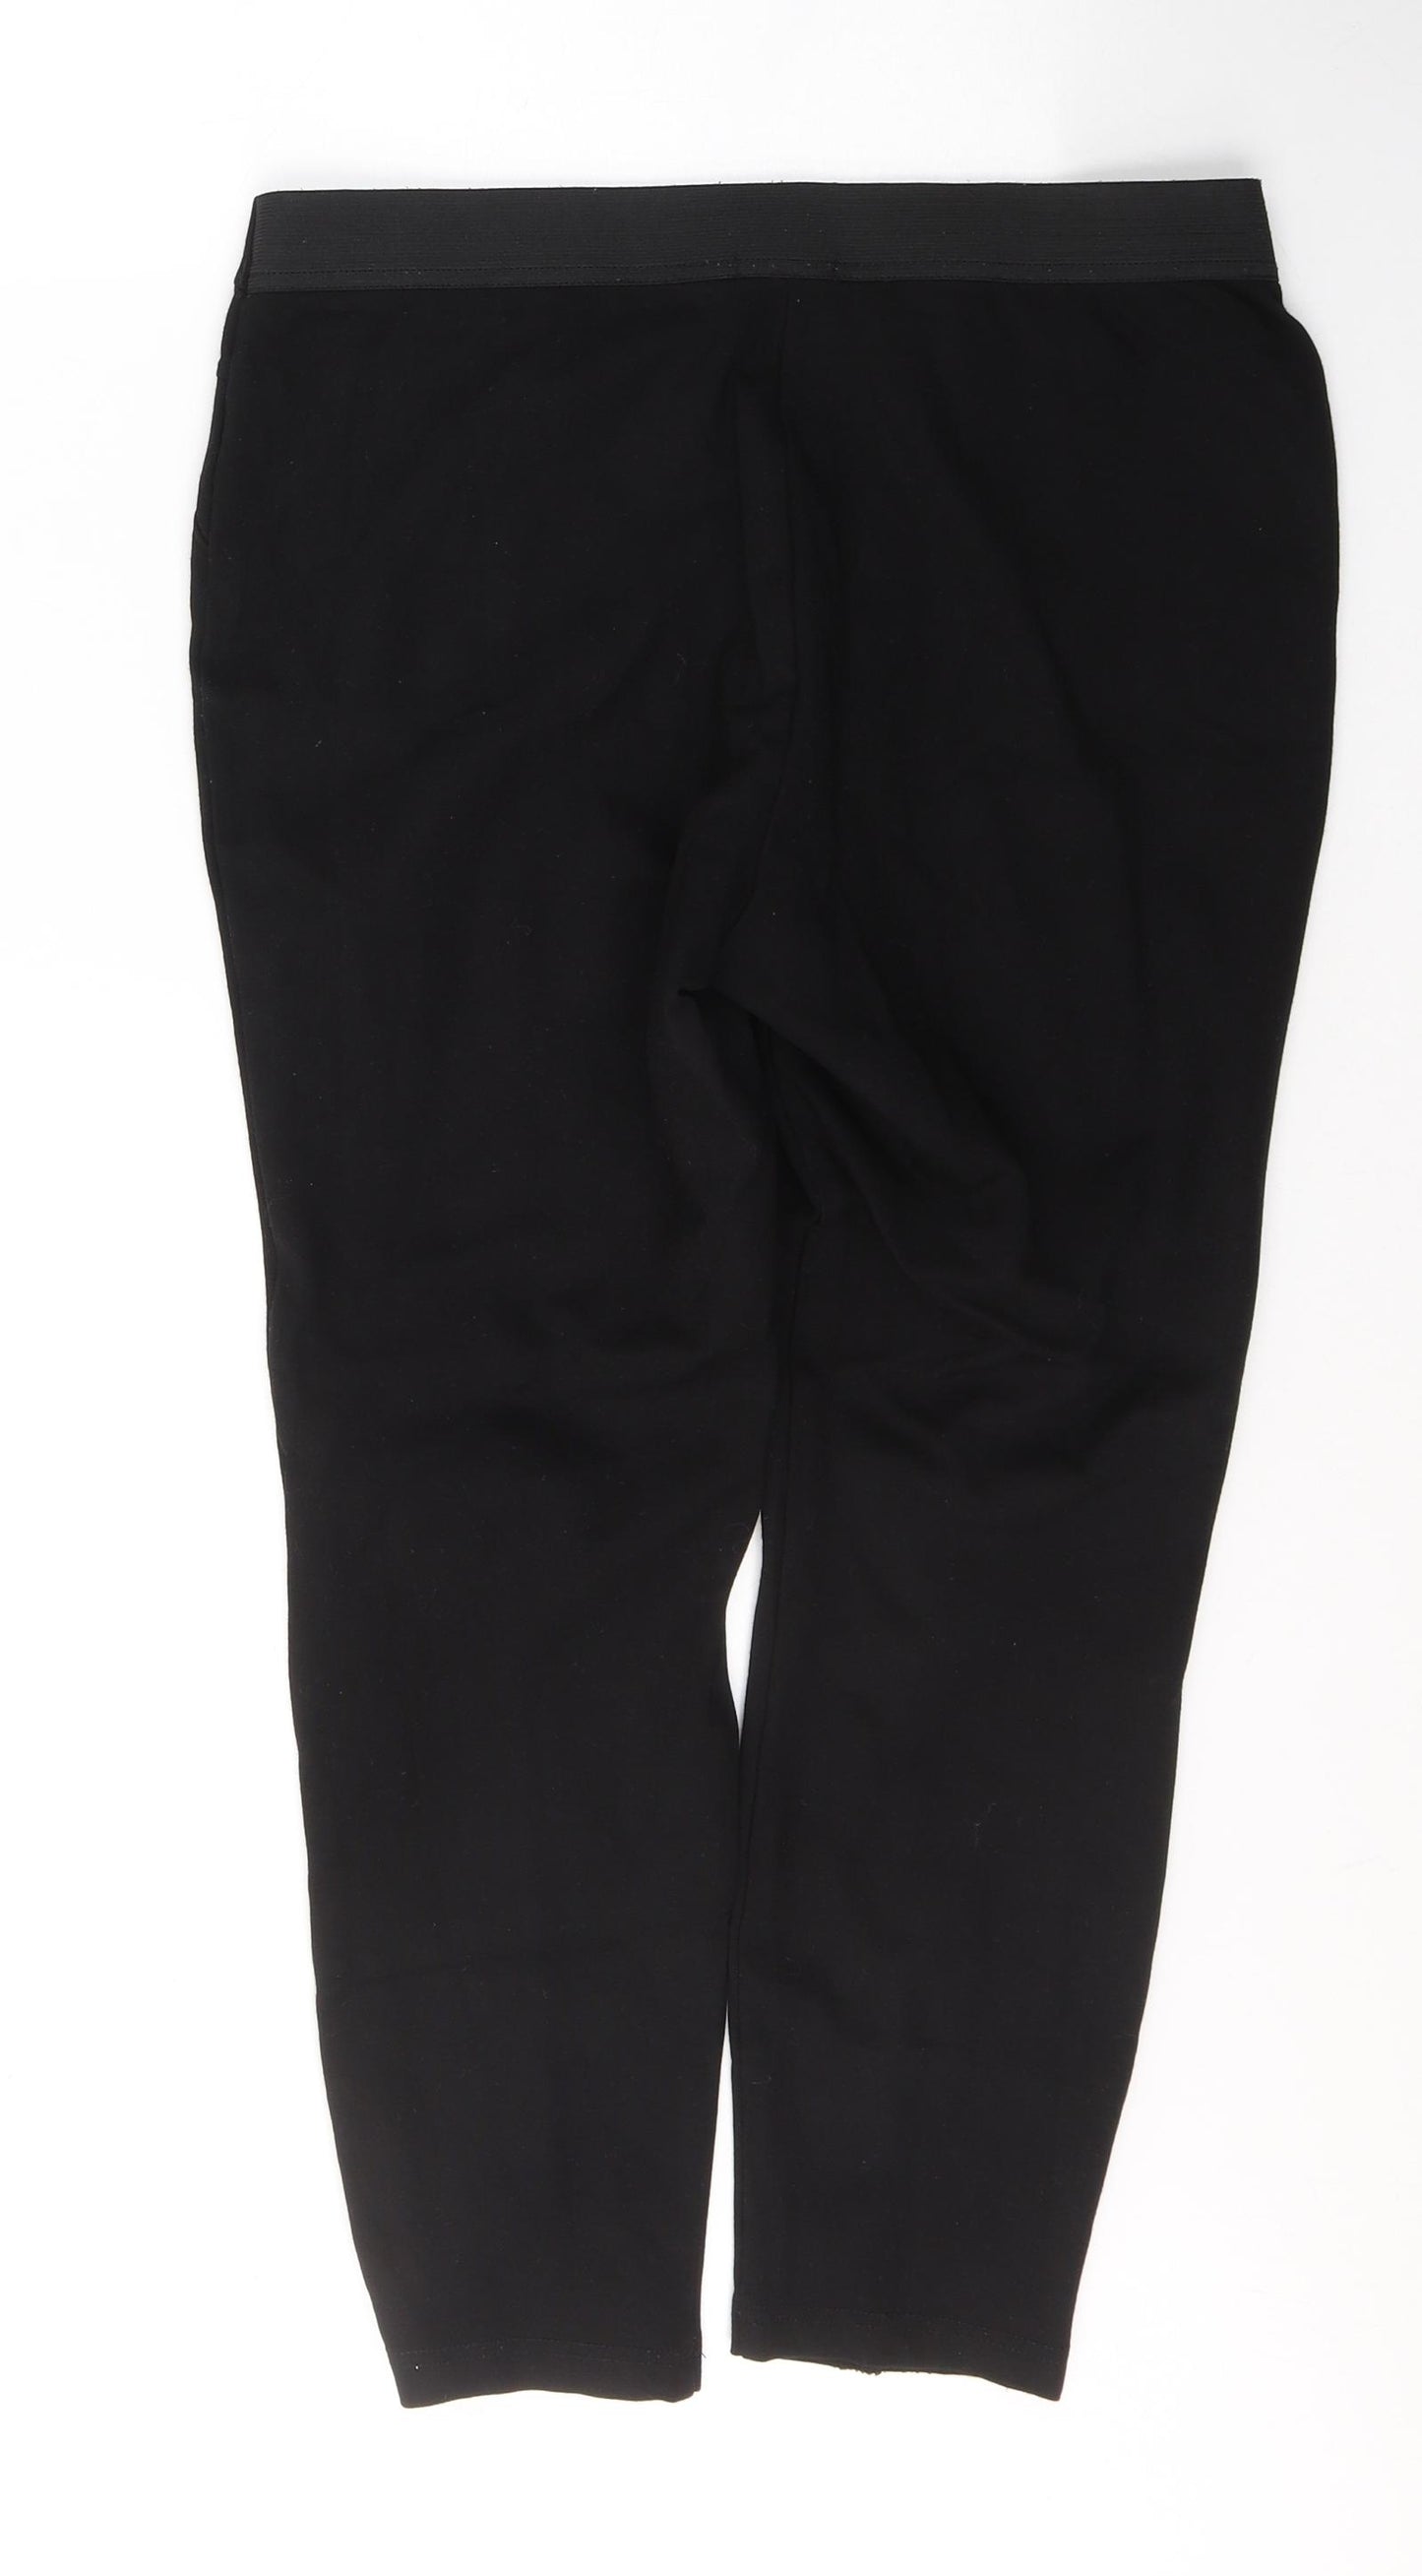 Dunnes Stores Womens Black  Polyester Jegging Leggings Size L L24 in